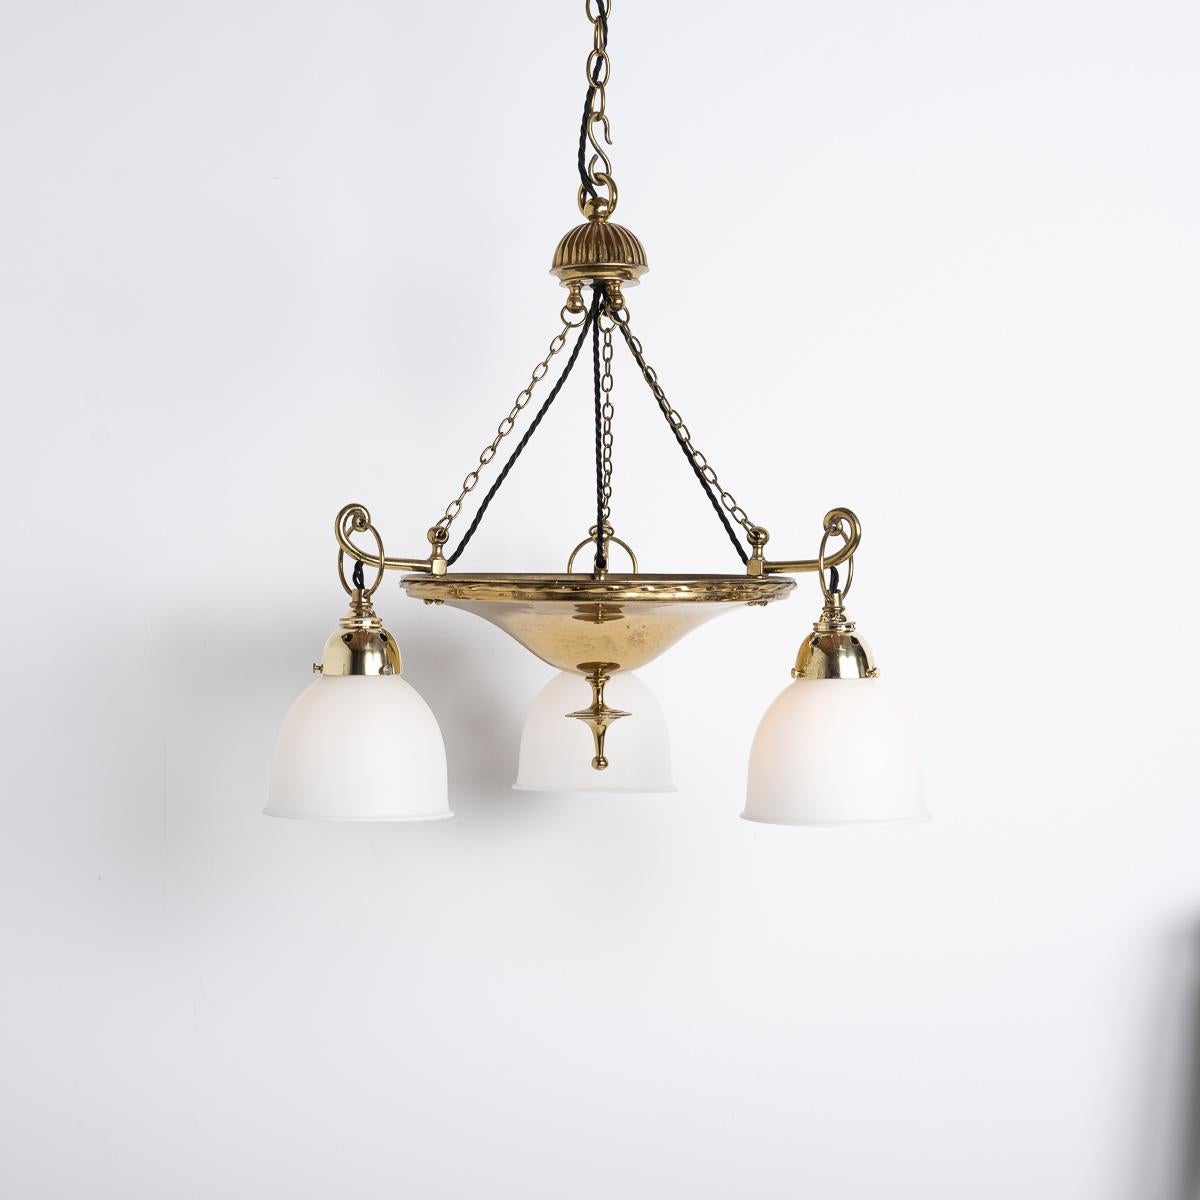 English Antique Brass Ring Chandelier with Satin Opaline Glass Shades by GEC